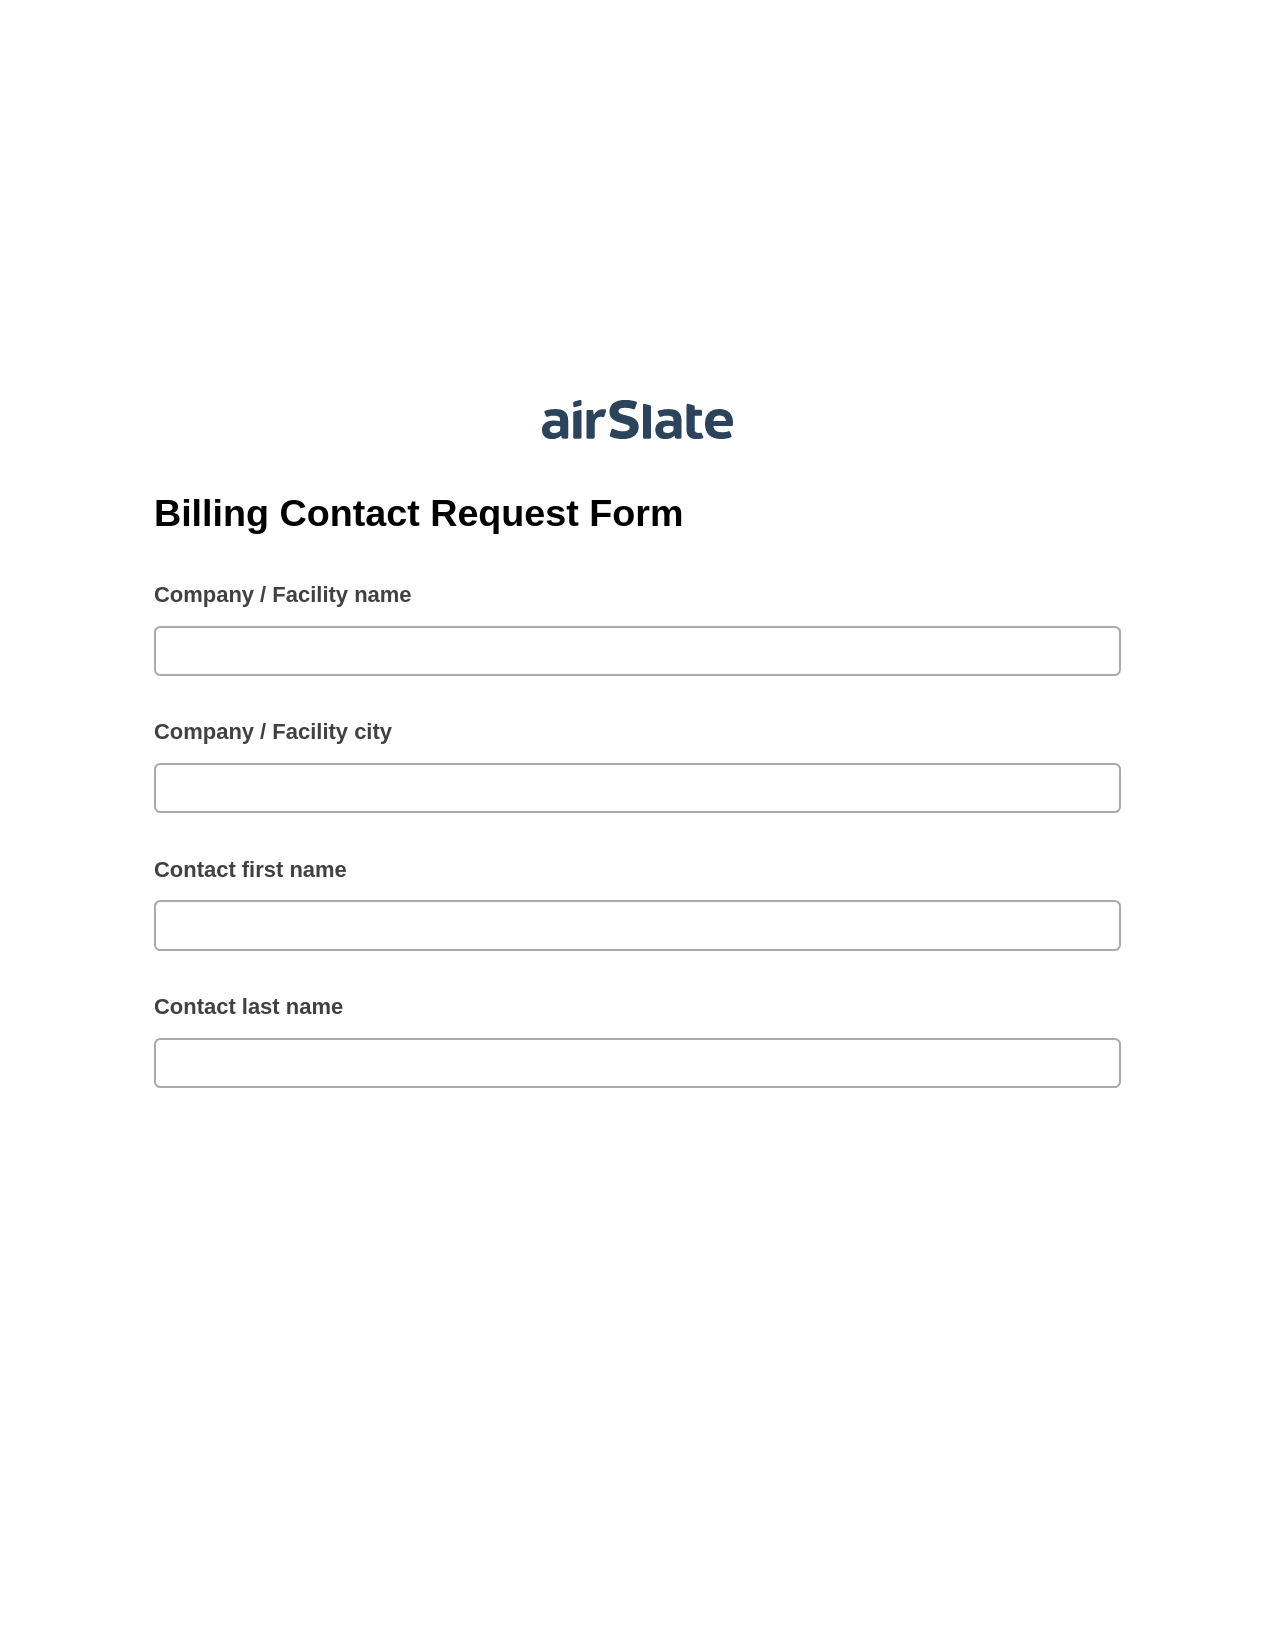 Multirole Billing Contact Request Form Pre-fill from another Slate Bot, Google Cloud Print Bot, Box Bot